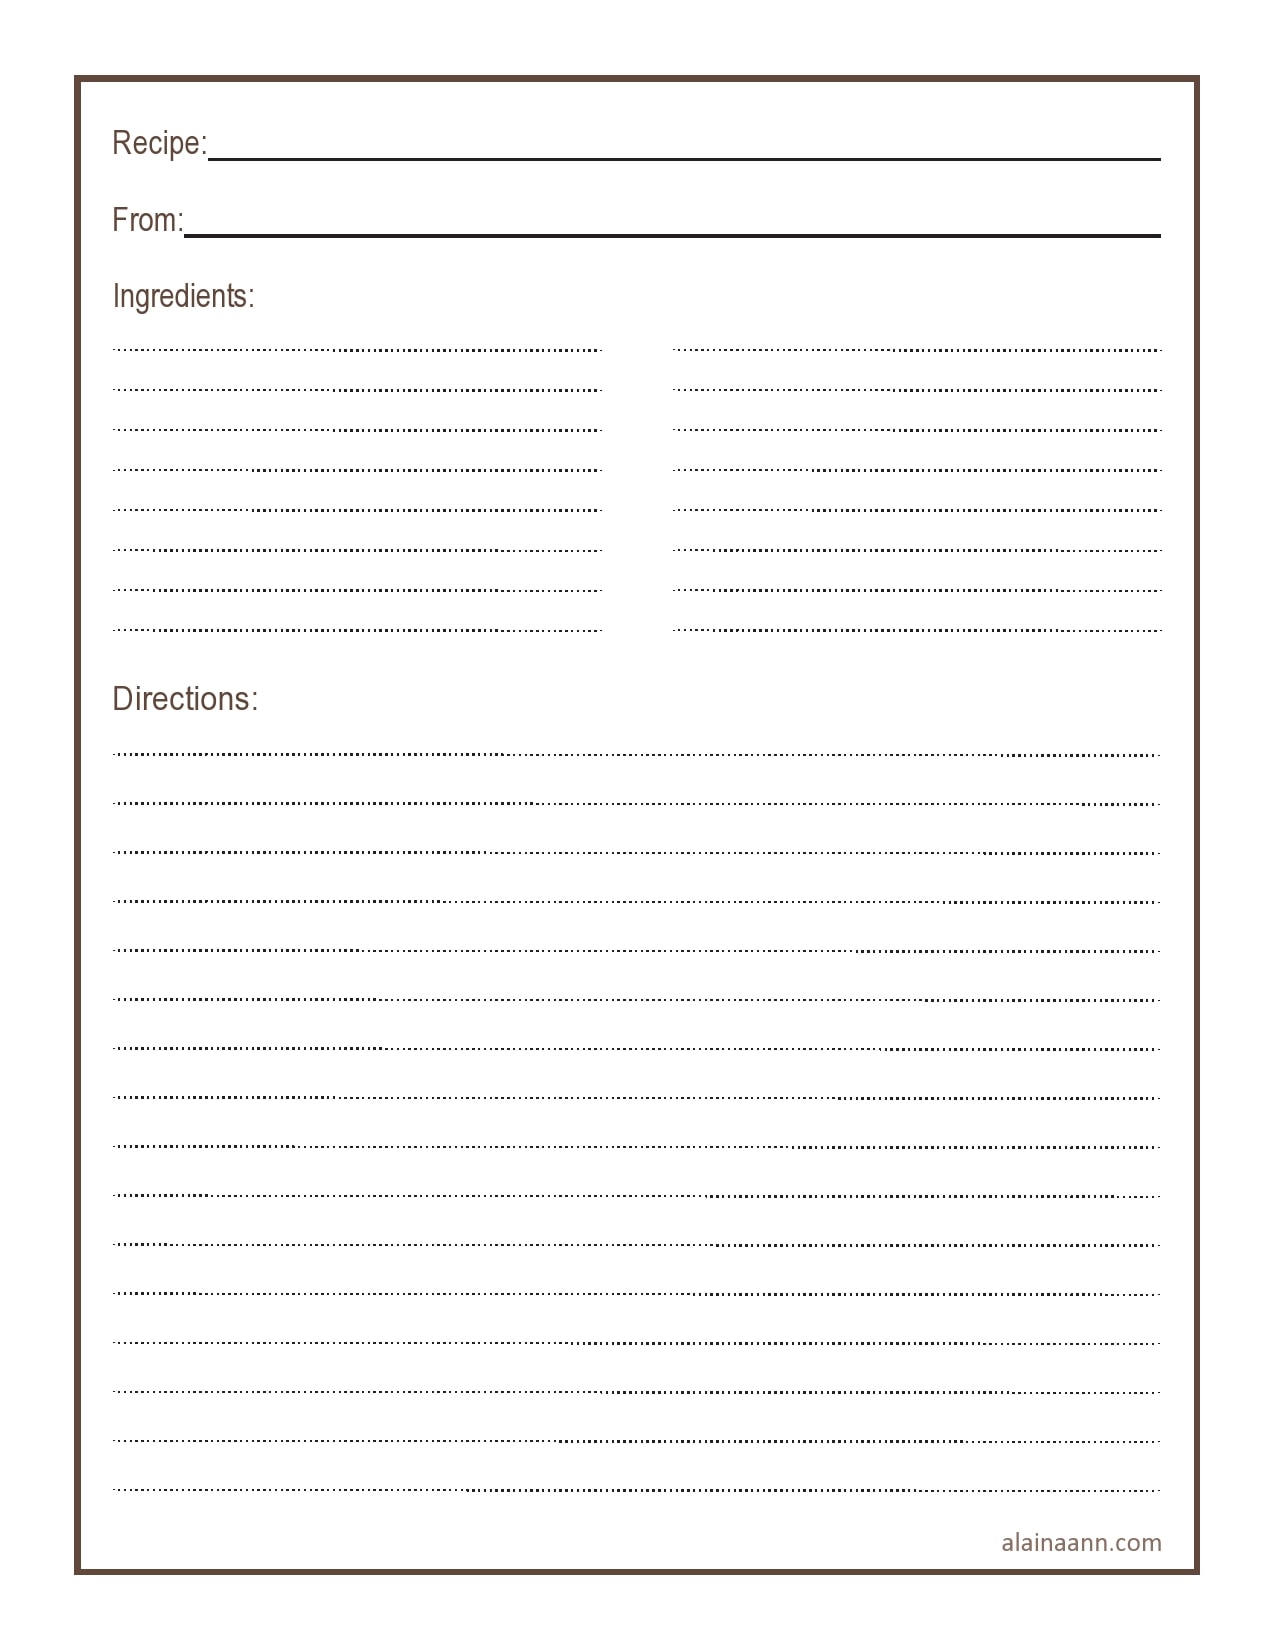 Recipe Card Template Word Doc - Image Of Food Recipe For Free Recipe Card Templates For Microsoft Word